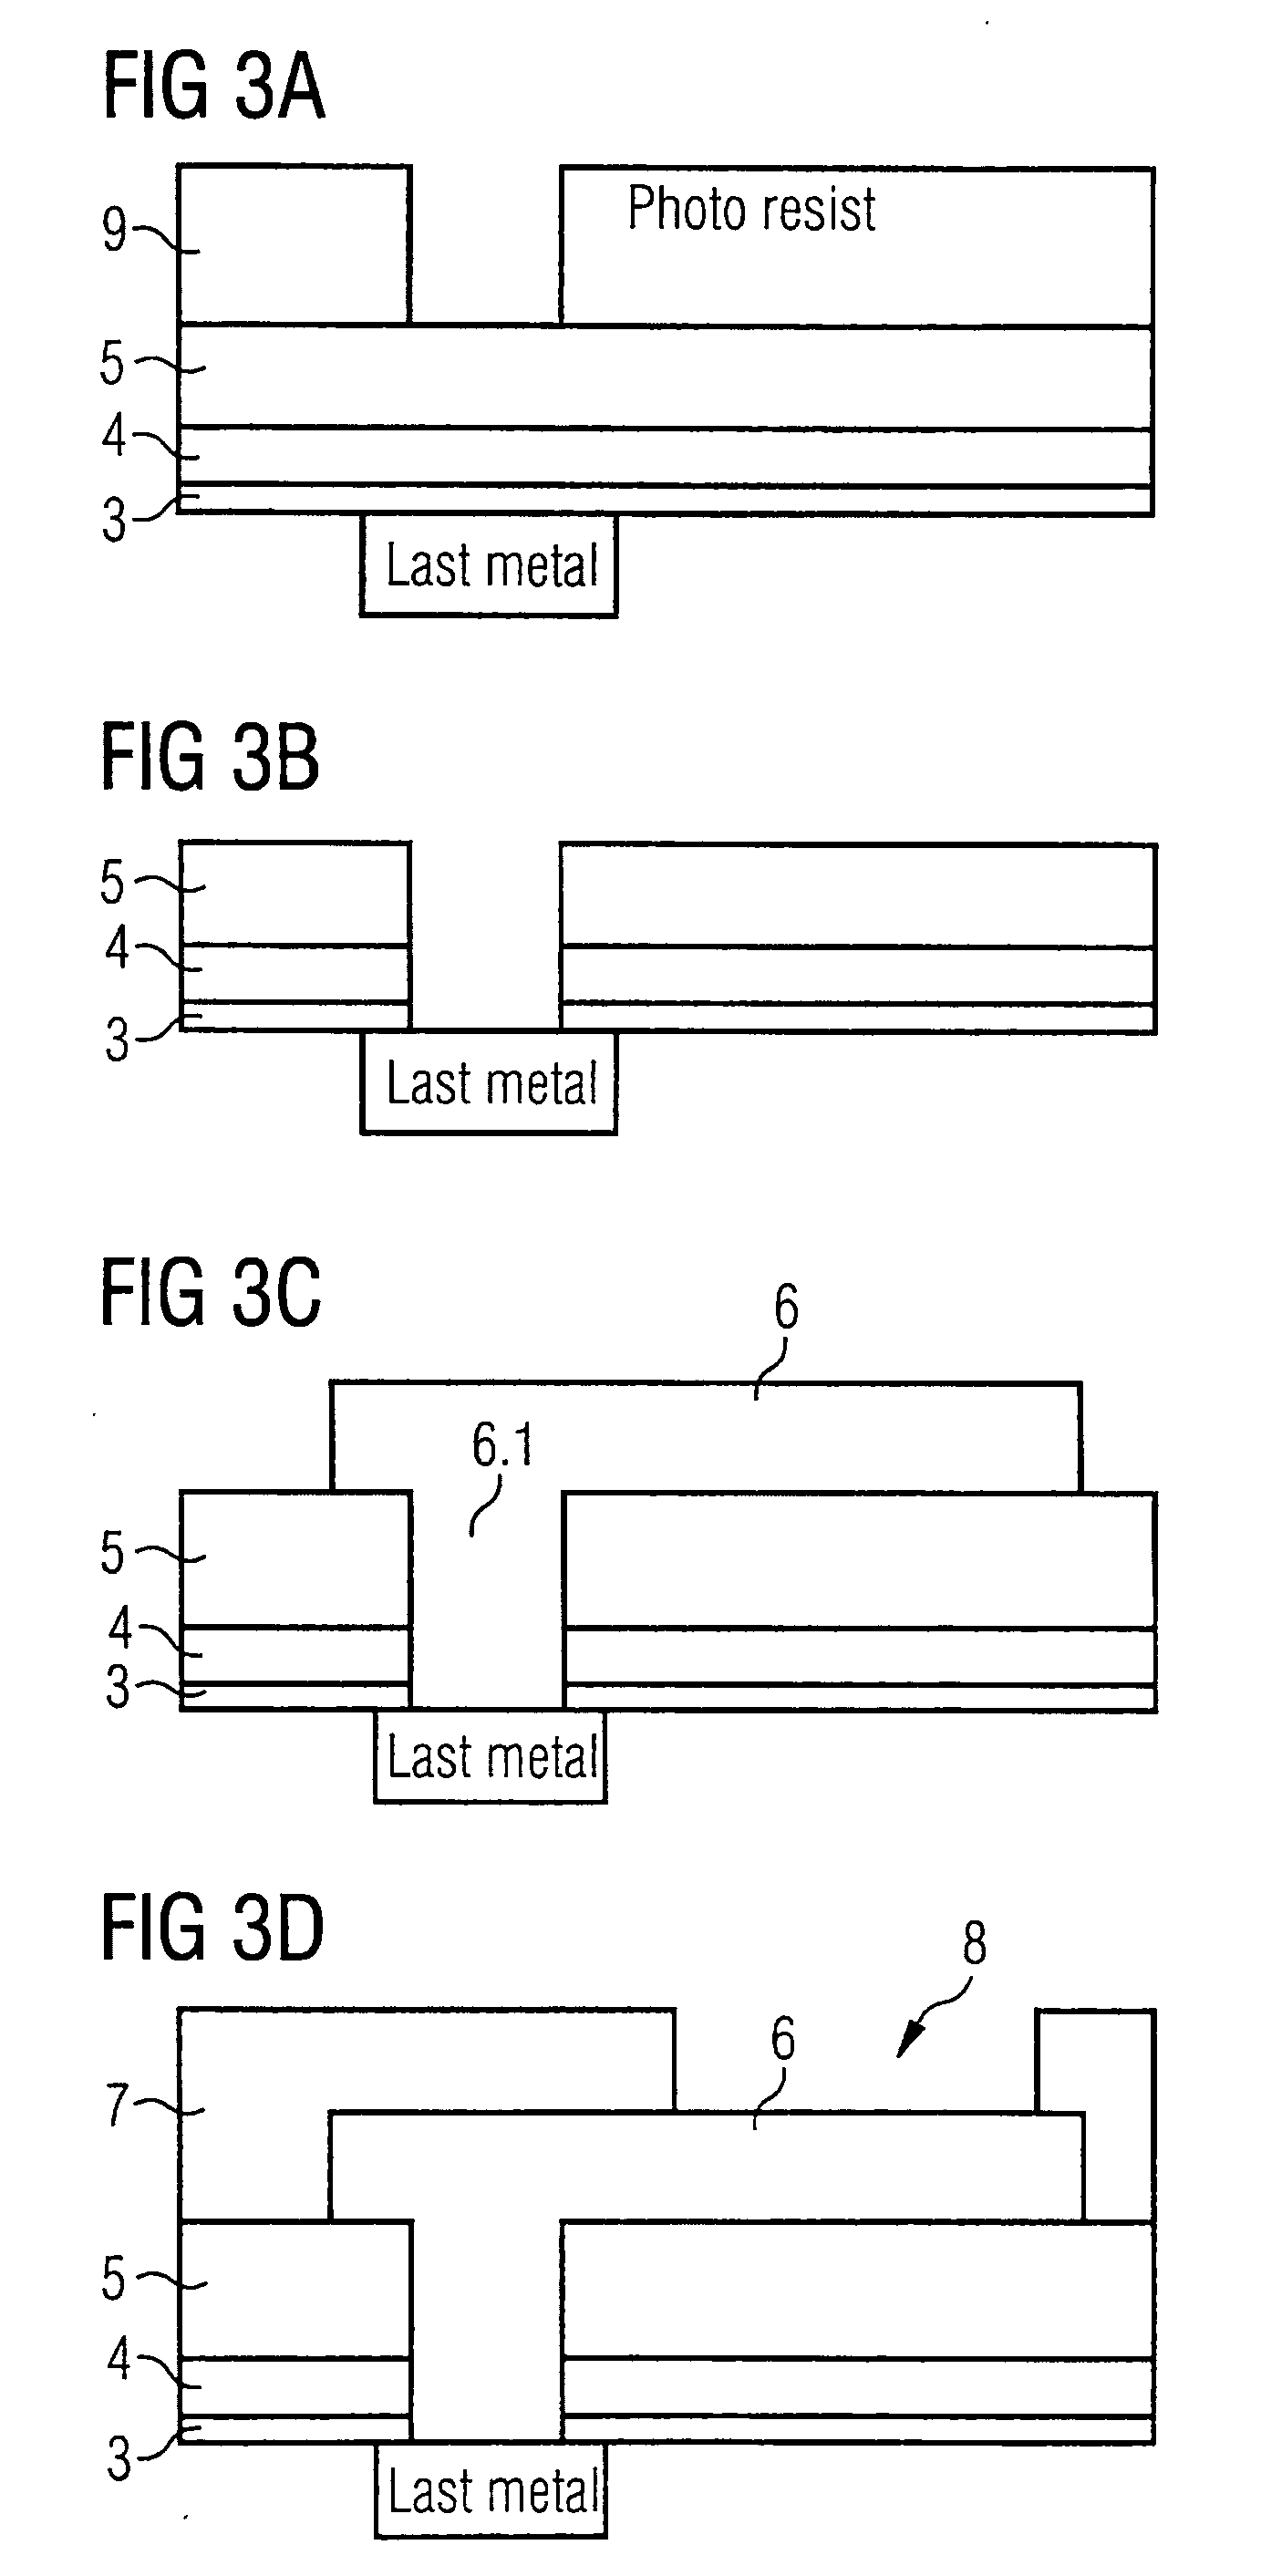 Final passivation scheme for integrated circuits